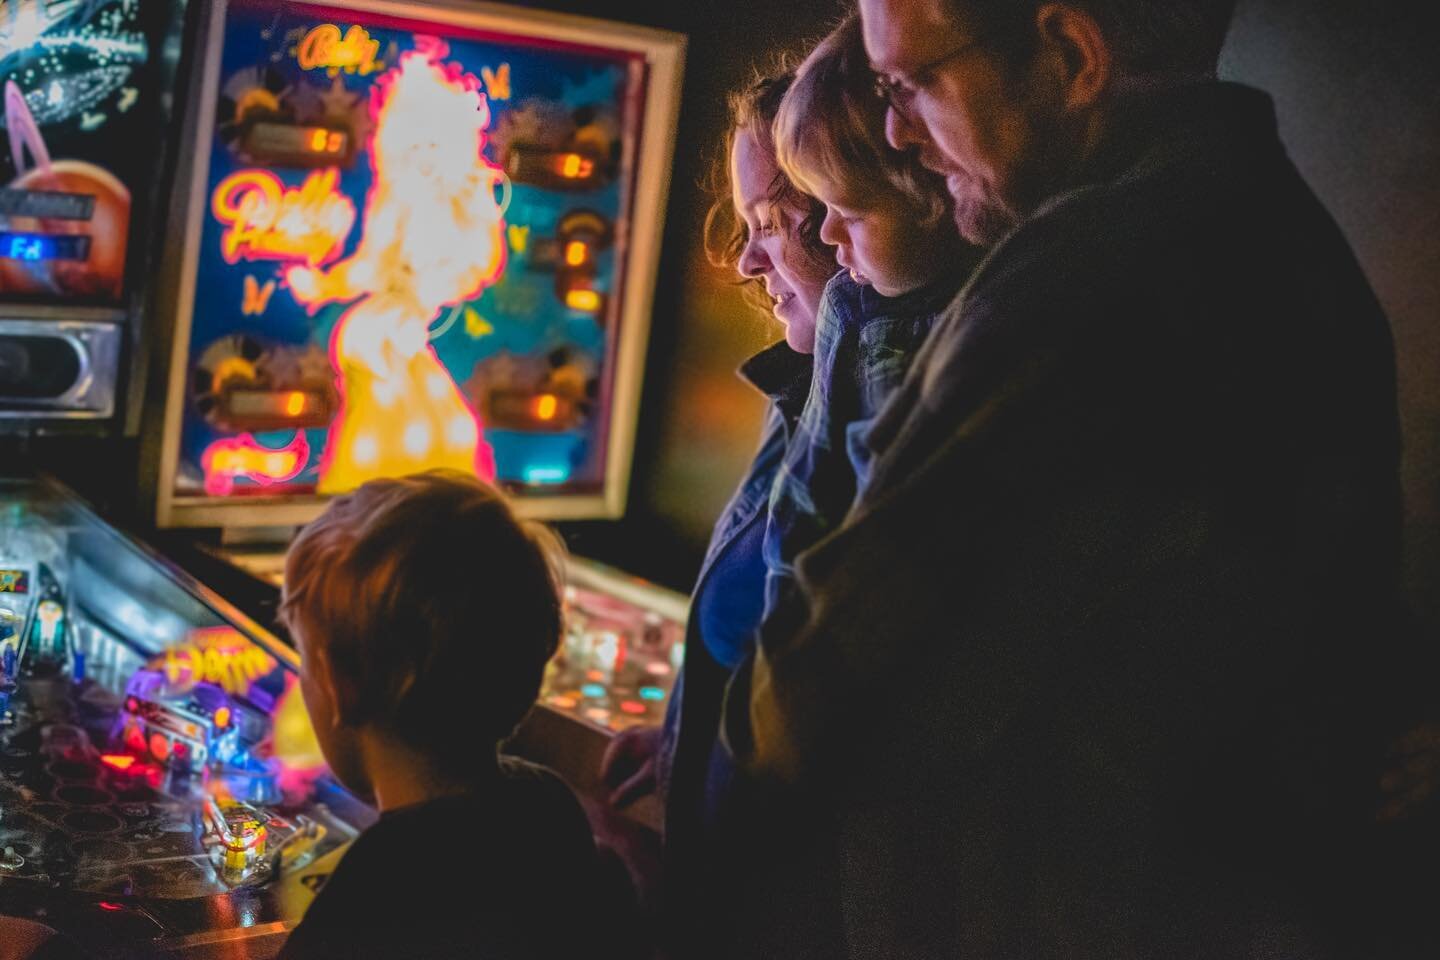 When you get to have a family session at a record store and arcade 🤩🤩#springfield #springfieldillinois #springfieldphotographer #springfieldillinoisphotographer #centralillinoisphotographer #illinoisfamilyphotographer #springfieldfamilyphotographer